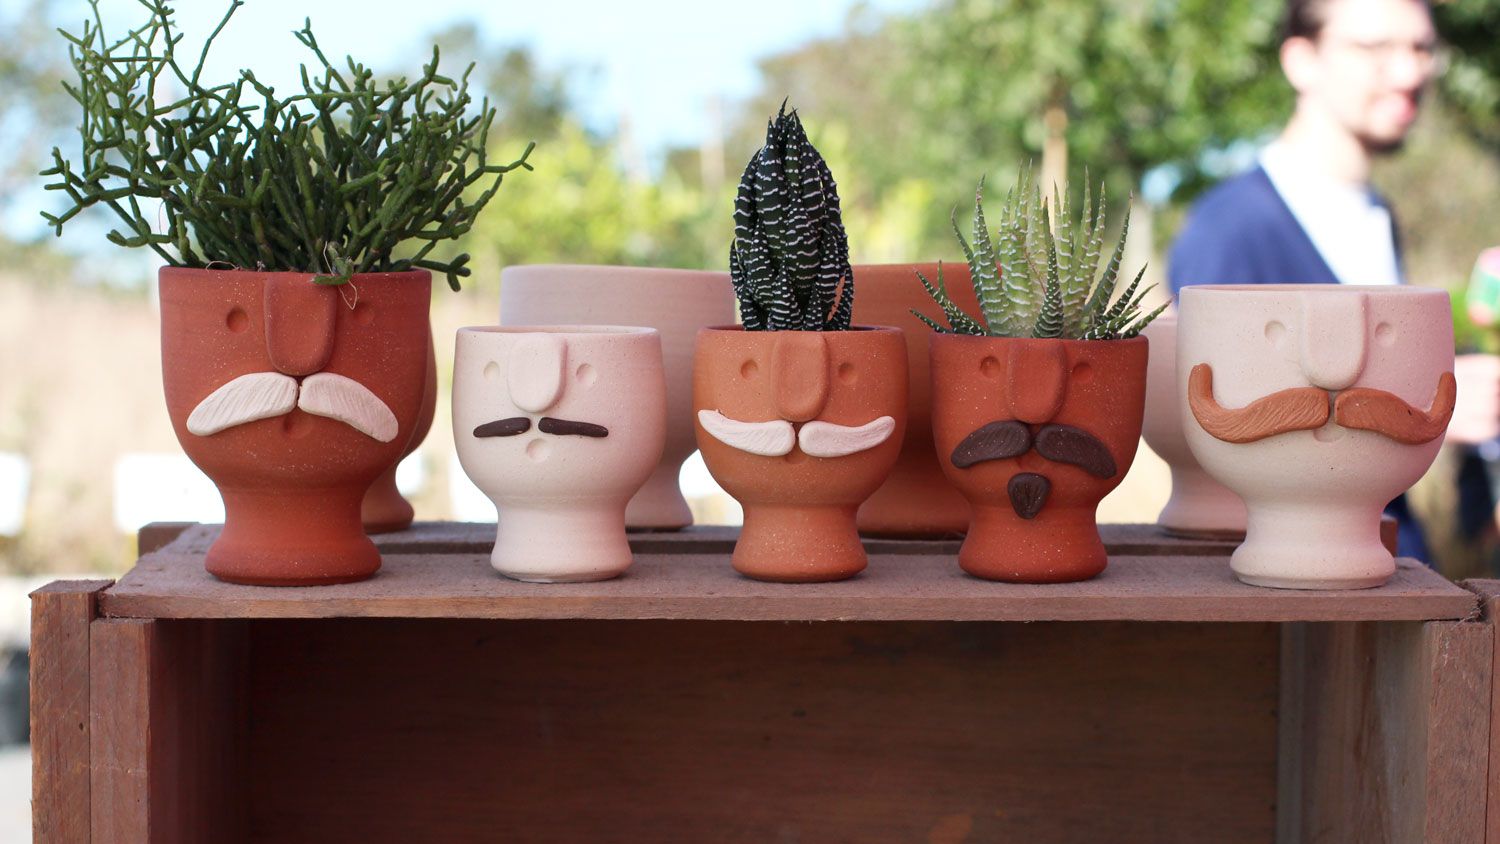 A row of potted plants. The pots have faces with mustaches.